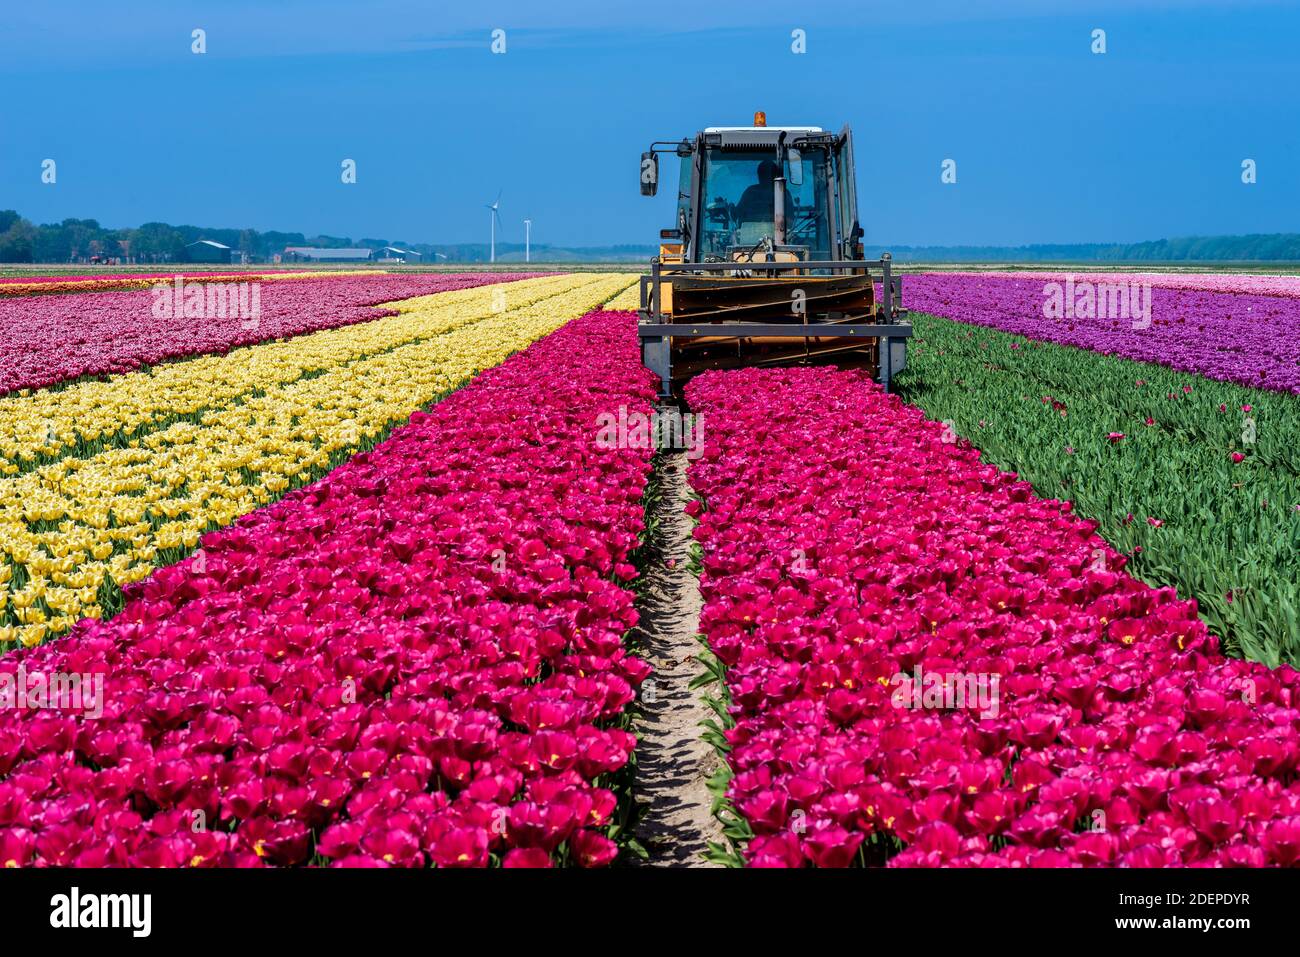 Tractor harvesting tulips in the field. The green row on the left has already been harvested. Stock Photo